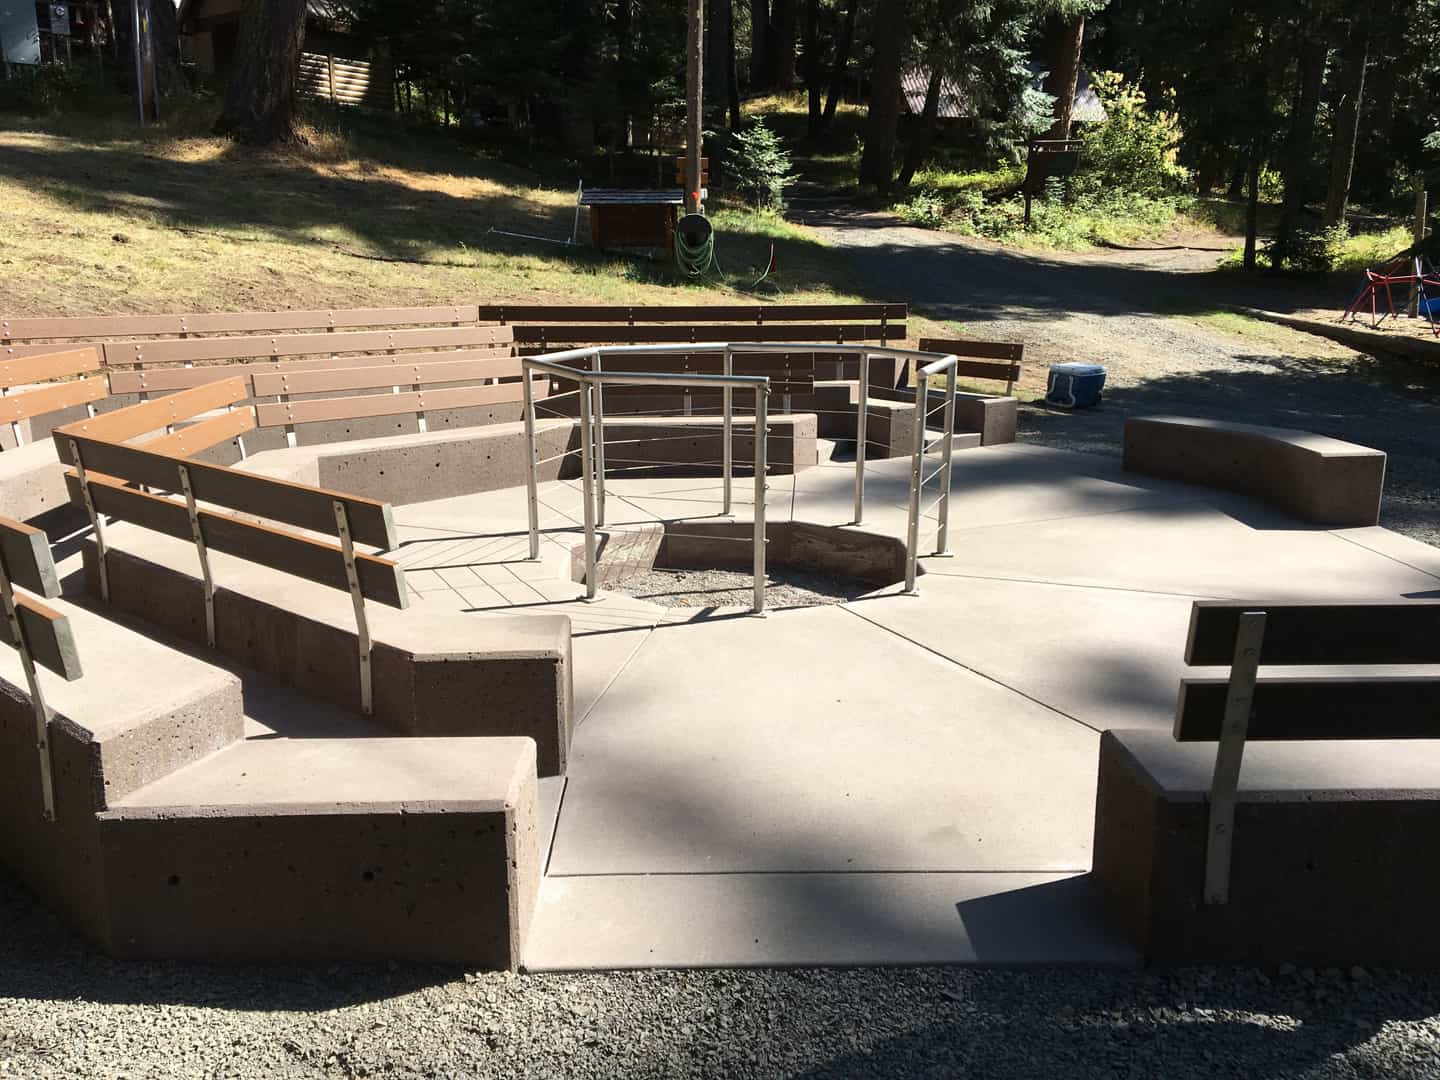 Concrete fire pit and seating area